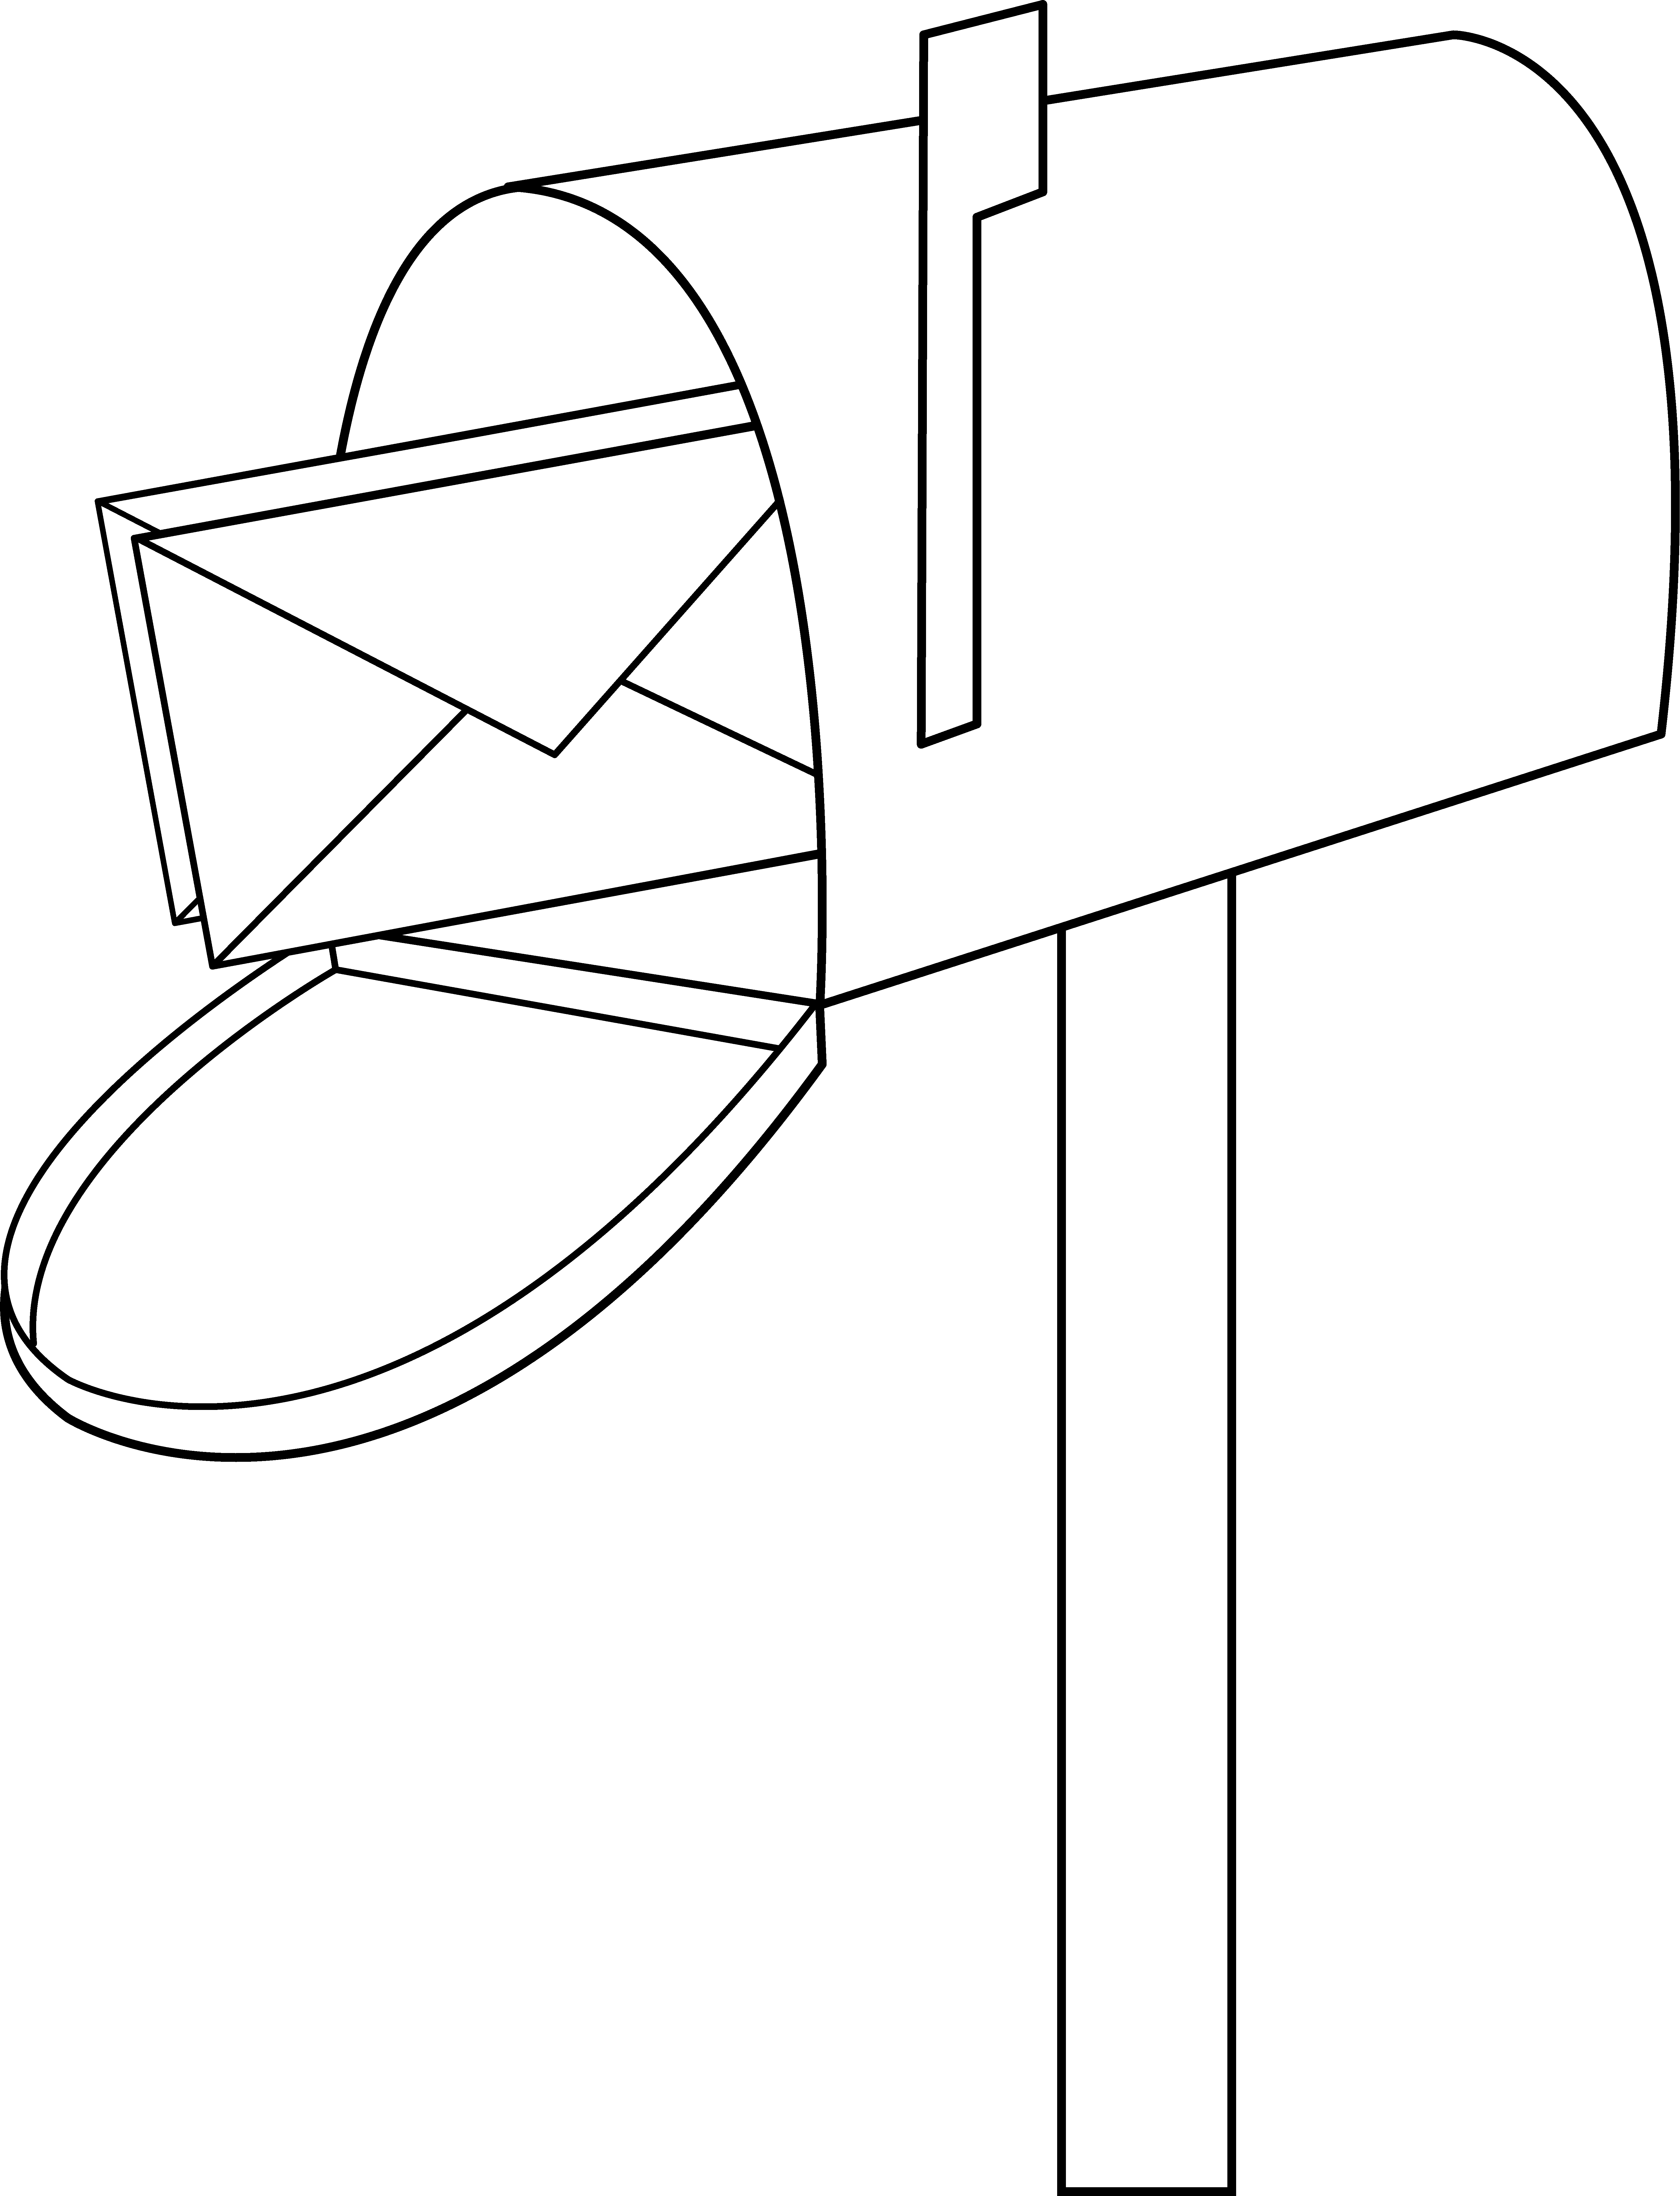 Mailbox letter black and white clipart